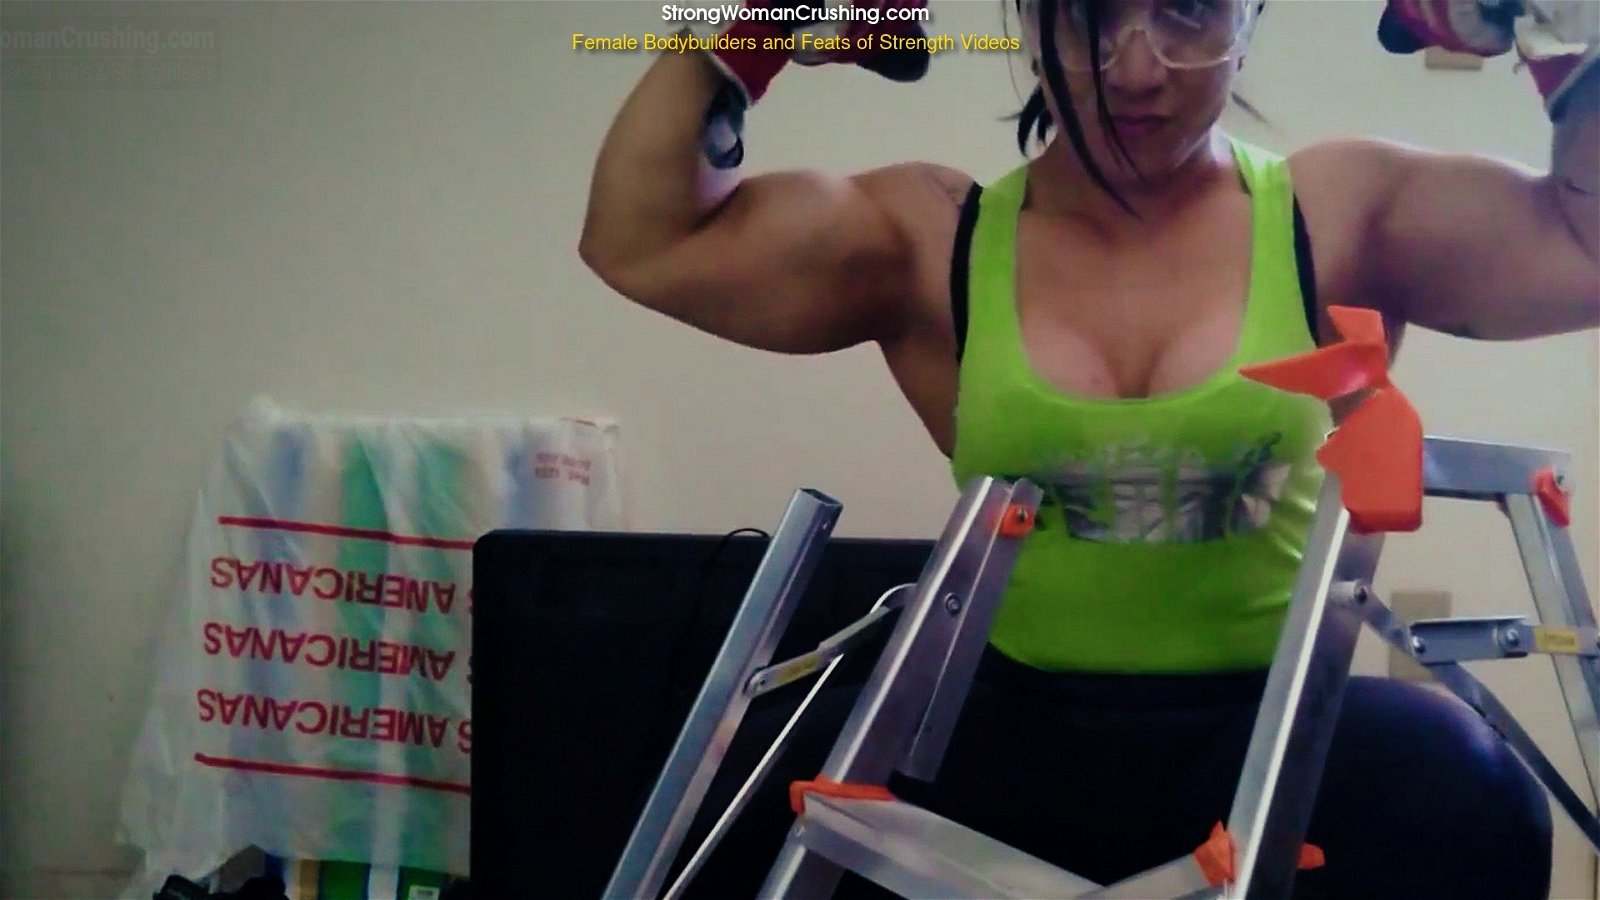 Photo by MusclegirlStrength with the username @MusclegirlStrength, who is a brand user,  April 18, 2024 at 2:51 AM and the text says 'Muscle Goddess Karla Bachiega Crushes Metal with Massive Biceps!: StrongWomanCrushing.com

#musclegirl #musclegirllove #femalemuscle #femalemuscles #featsofstrength #StrengthInBeauty #MusclesAndGrace #PowerfulWomen'